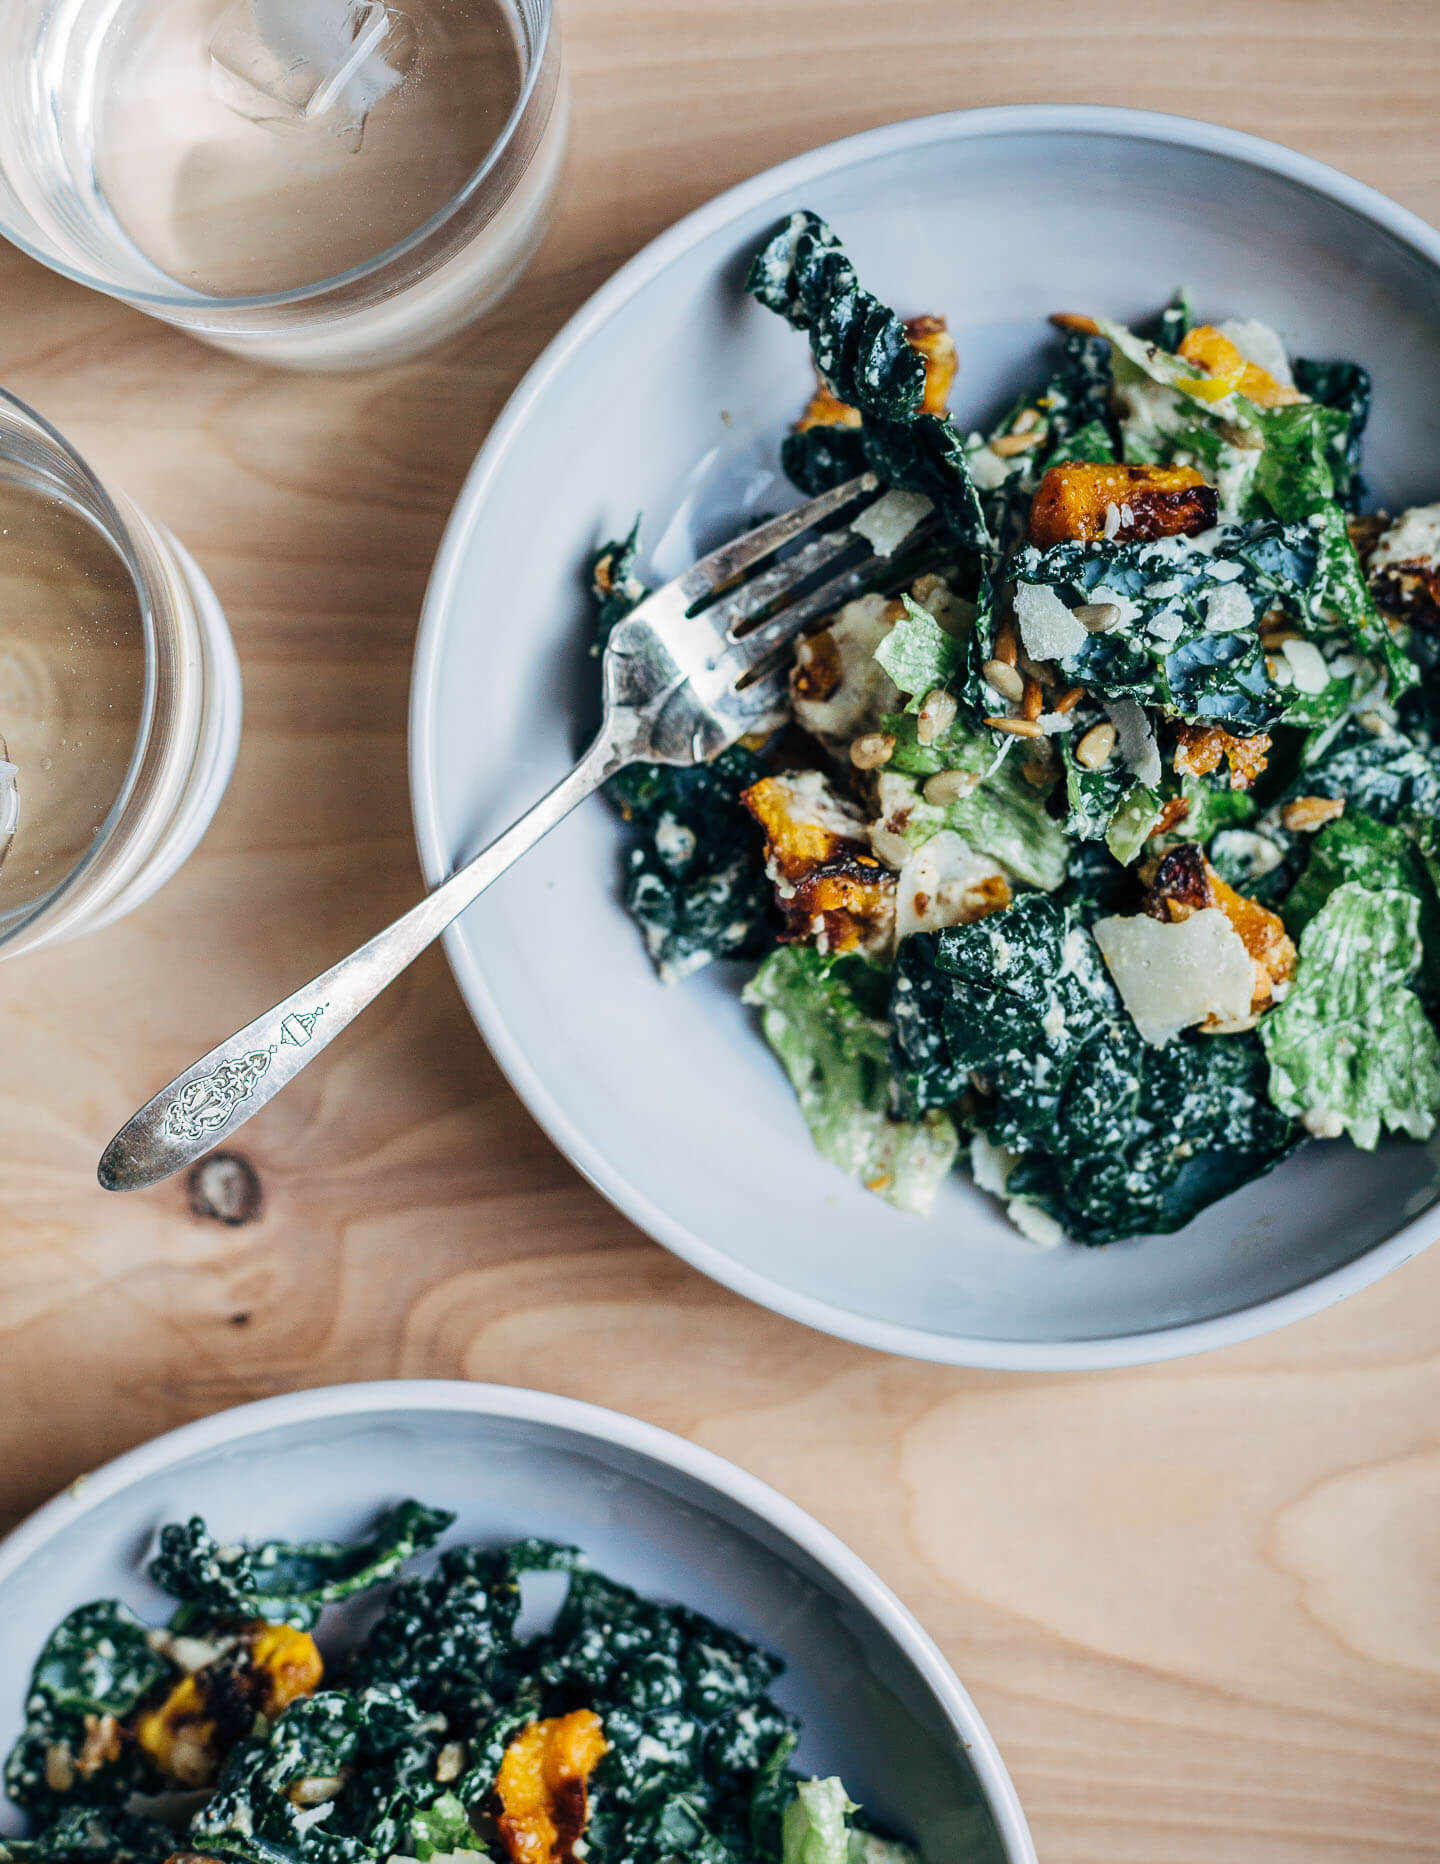 Complex, layered, and rich, this romaine and kale Caesar salad with Parmesan-crusted butternut squash "croutons" and garlicky sunflower seed Caesar dressing embraces all the best things about the transition to fall cooking.